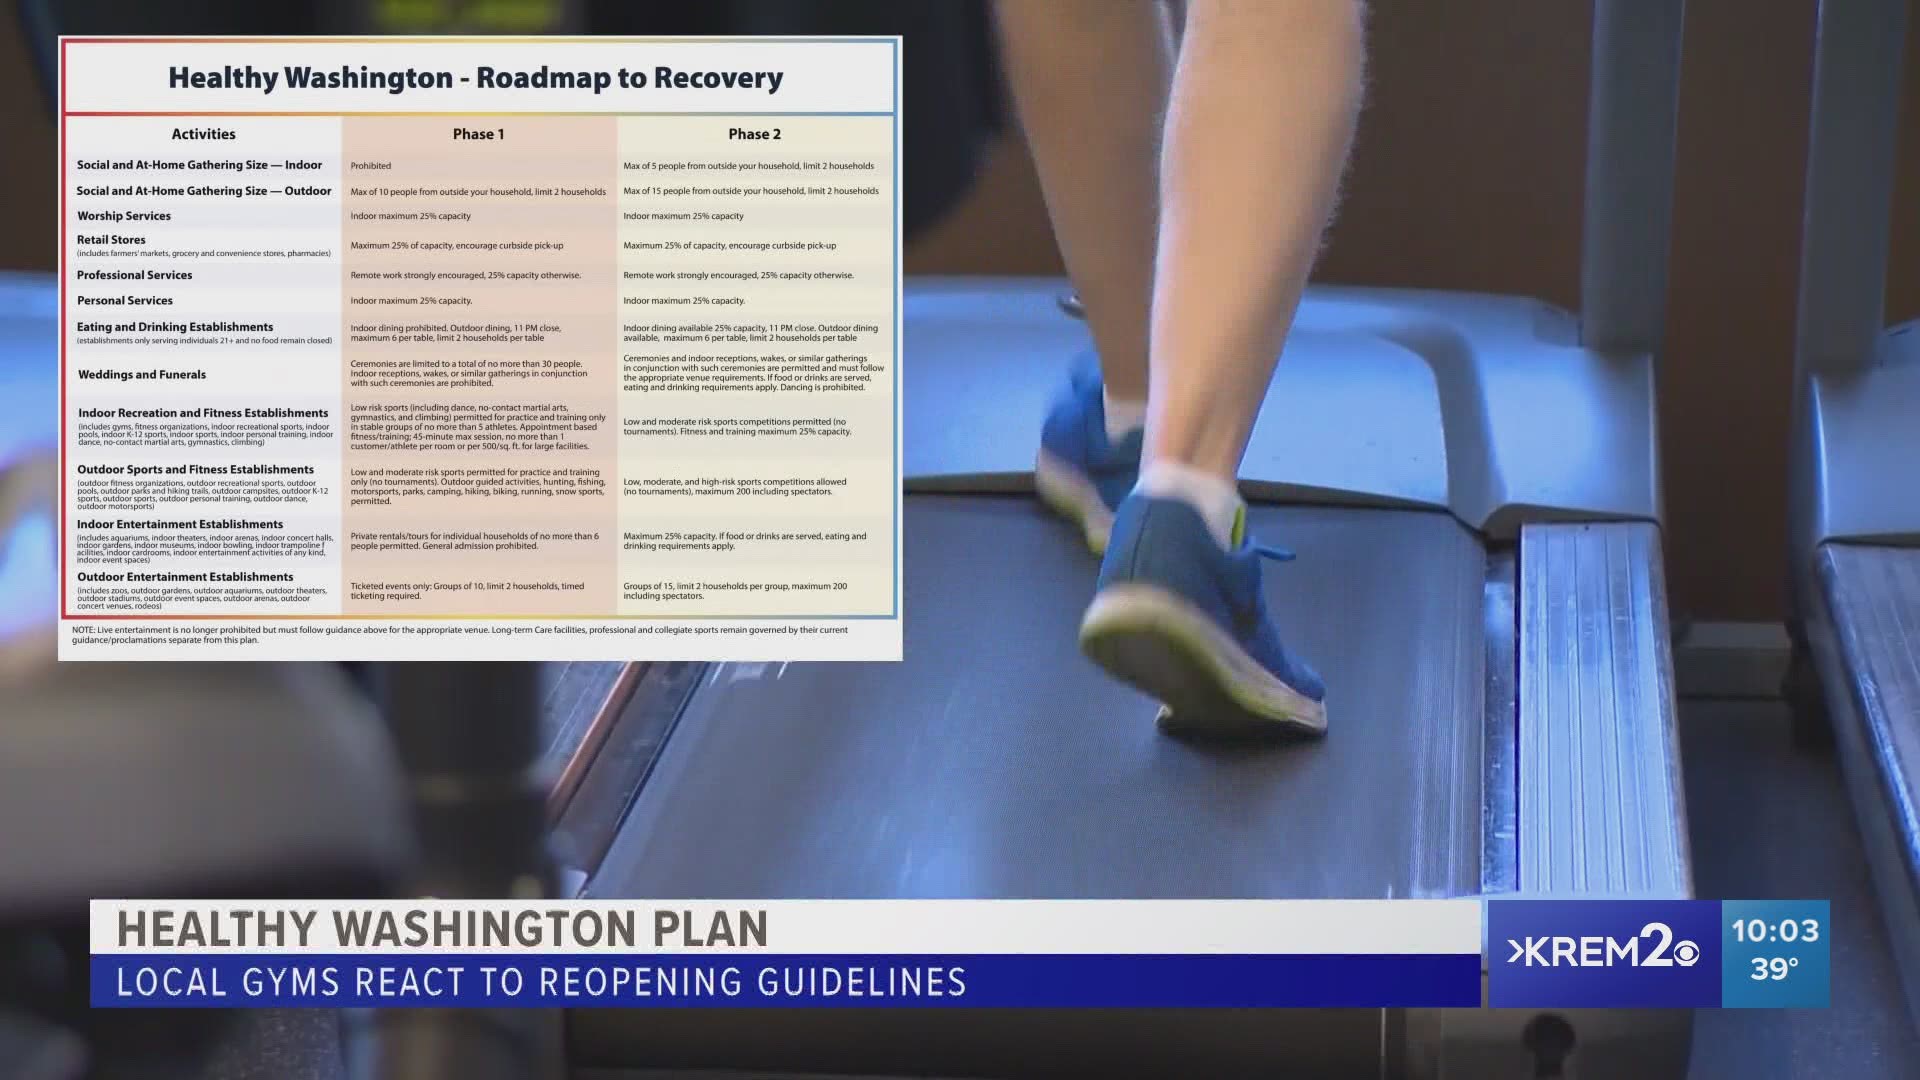 Indoor recreation and fitness establishments are set to return under the new road to recovery plan in Washington